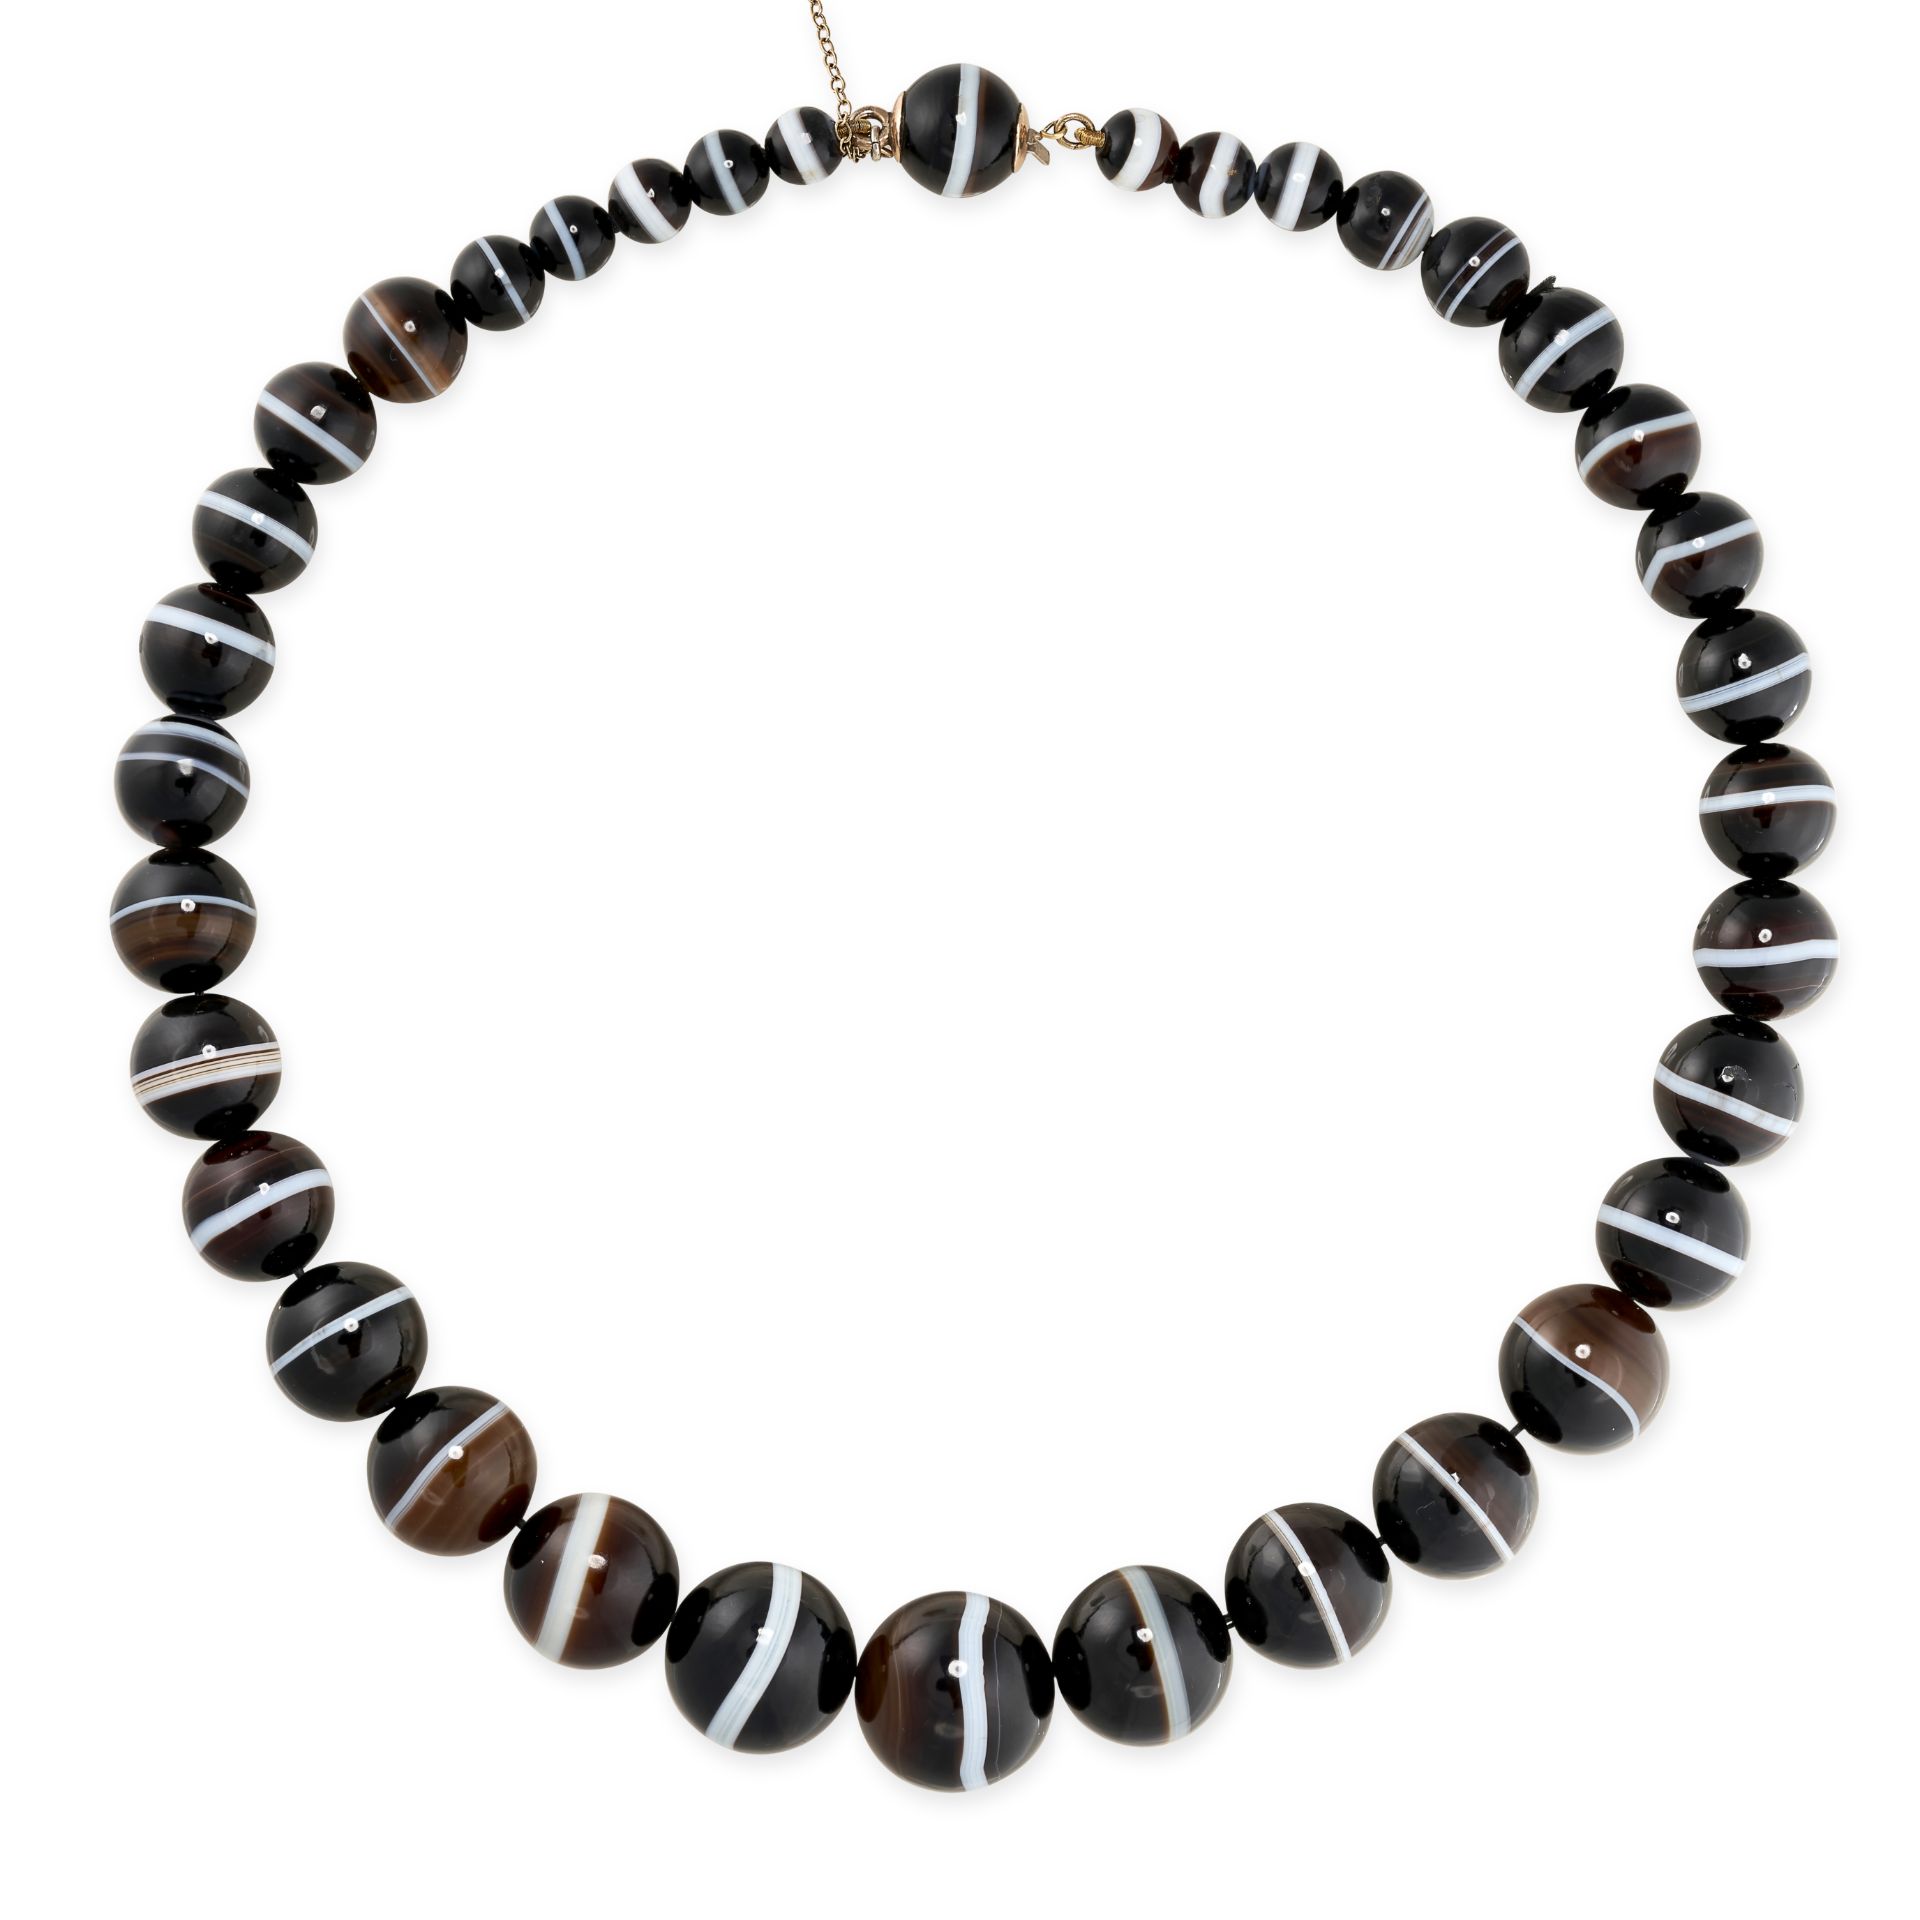 A BANDED AGATE BEAD NECKLACE comprising a single row of thirty-six graduated polished banded agate